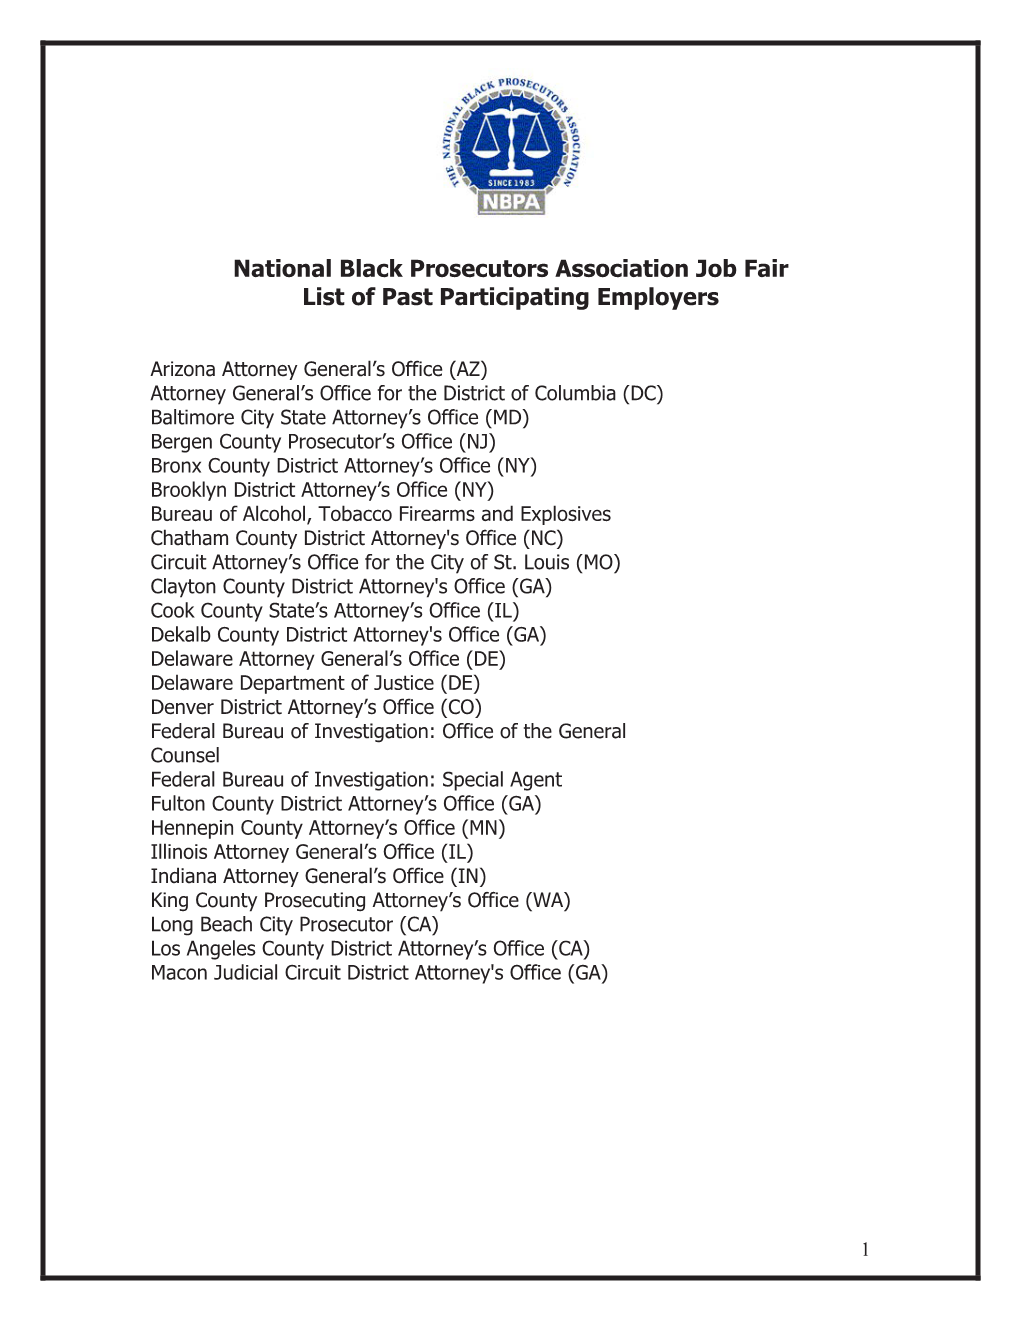 List of Past Participating Employers